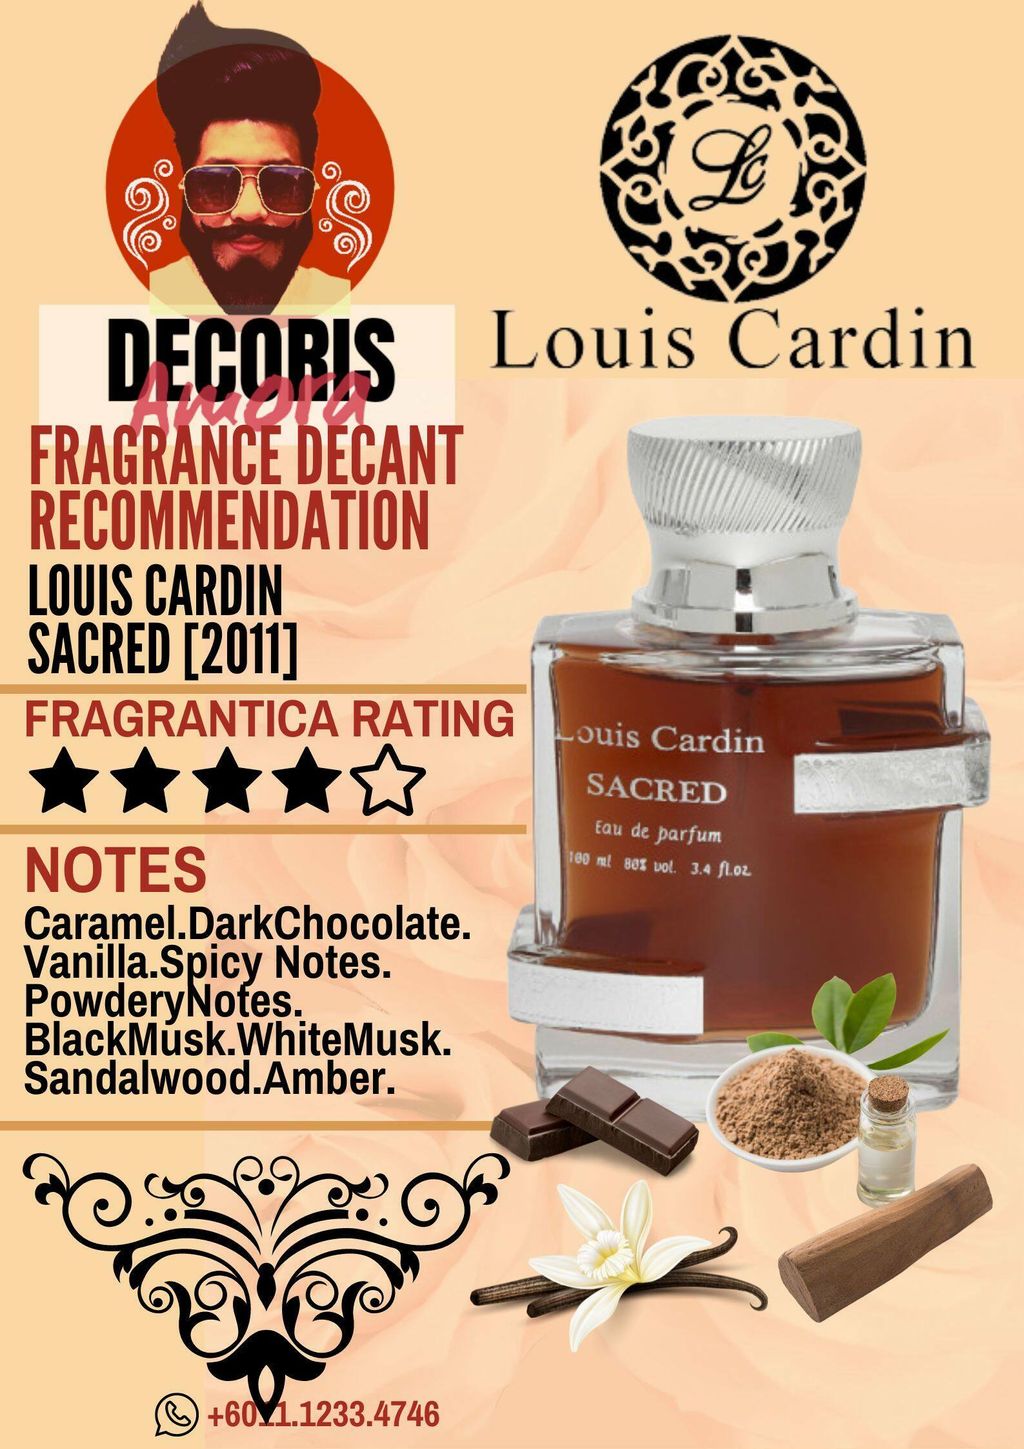 Louis Cardin SACRED First Impression  A UNIQUE AND POWERFUL CARAMEL  VANILLA GOURMAND FRAGRANCE 